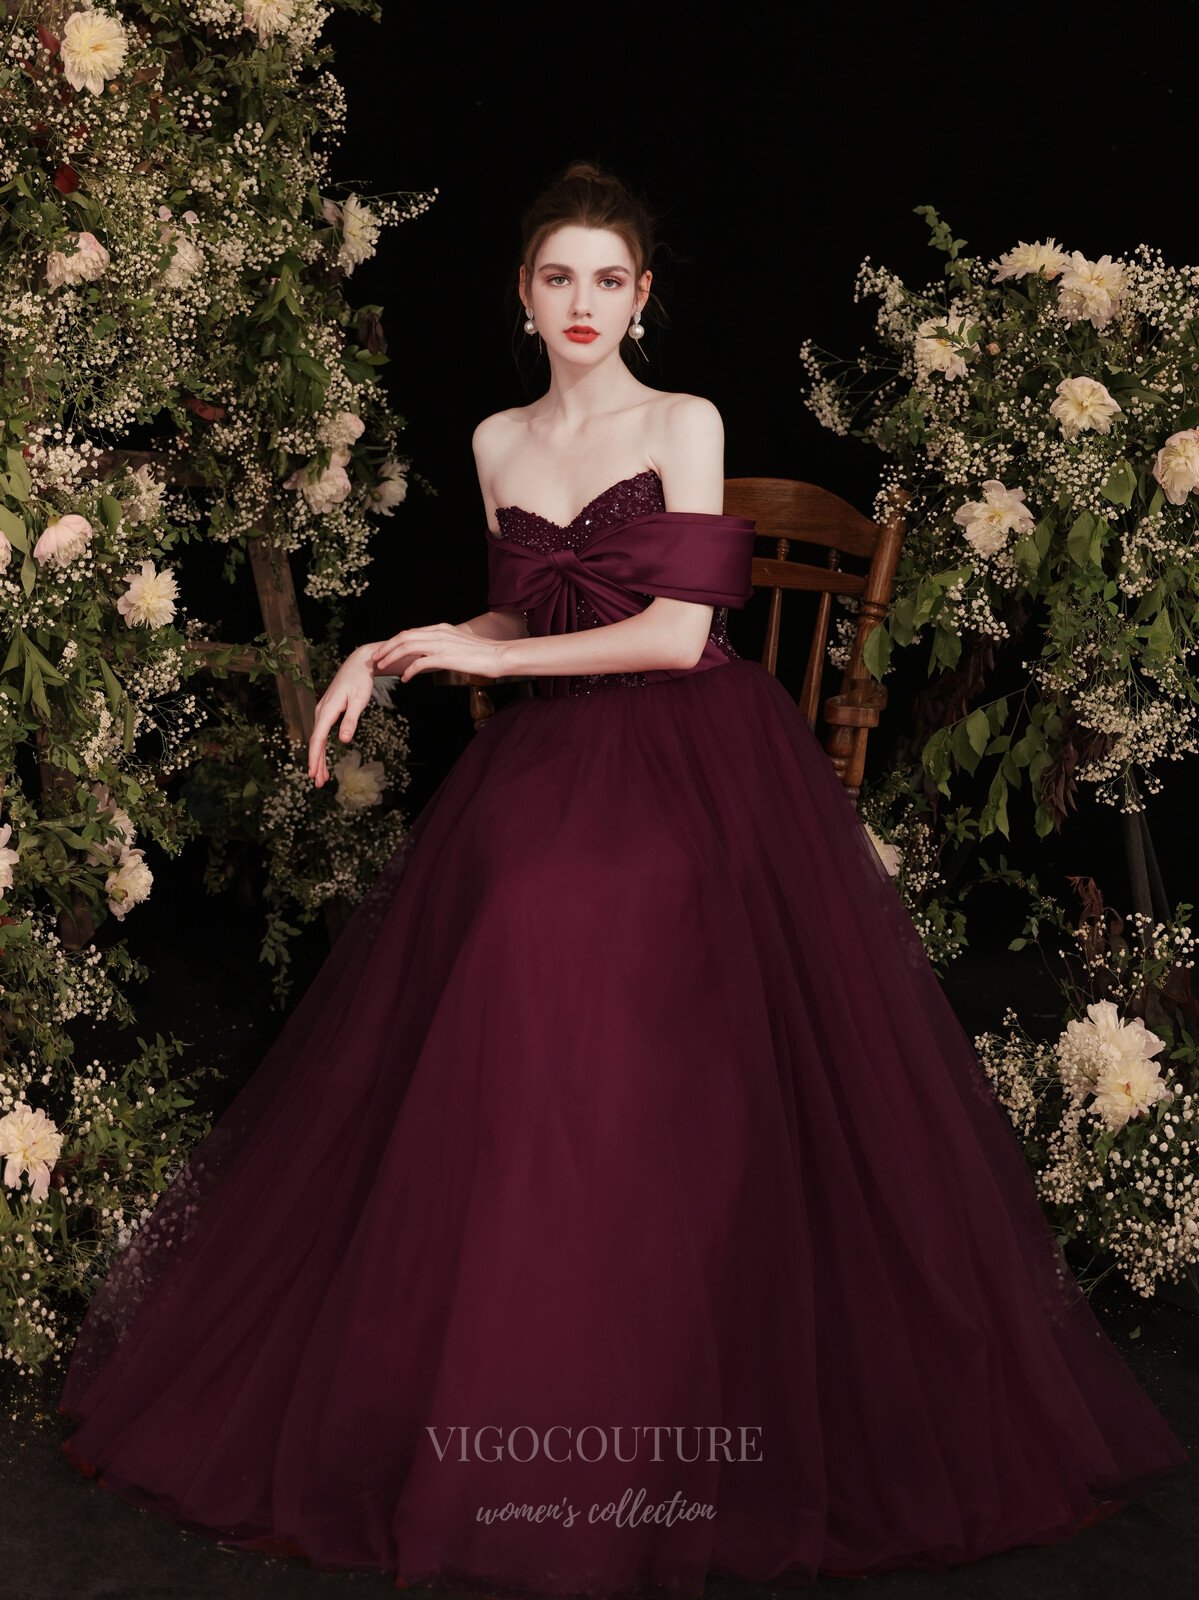 vigocouture-Burgundy Tulle Off the Shoulder Prom Dress 20731-Prom Dresses-vigocouture-Burgundy-US2-